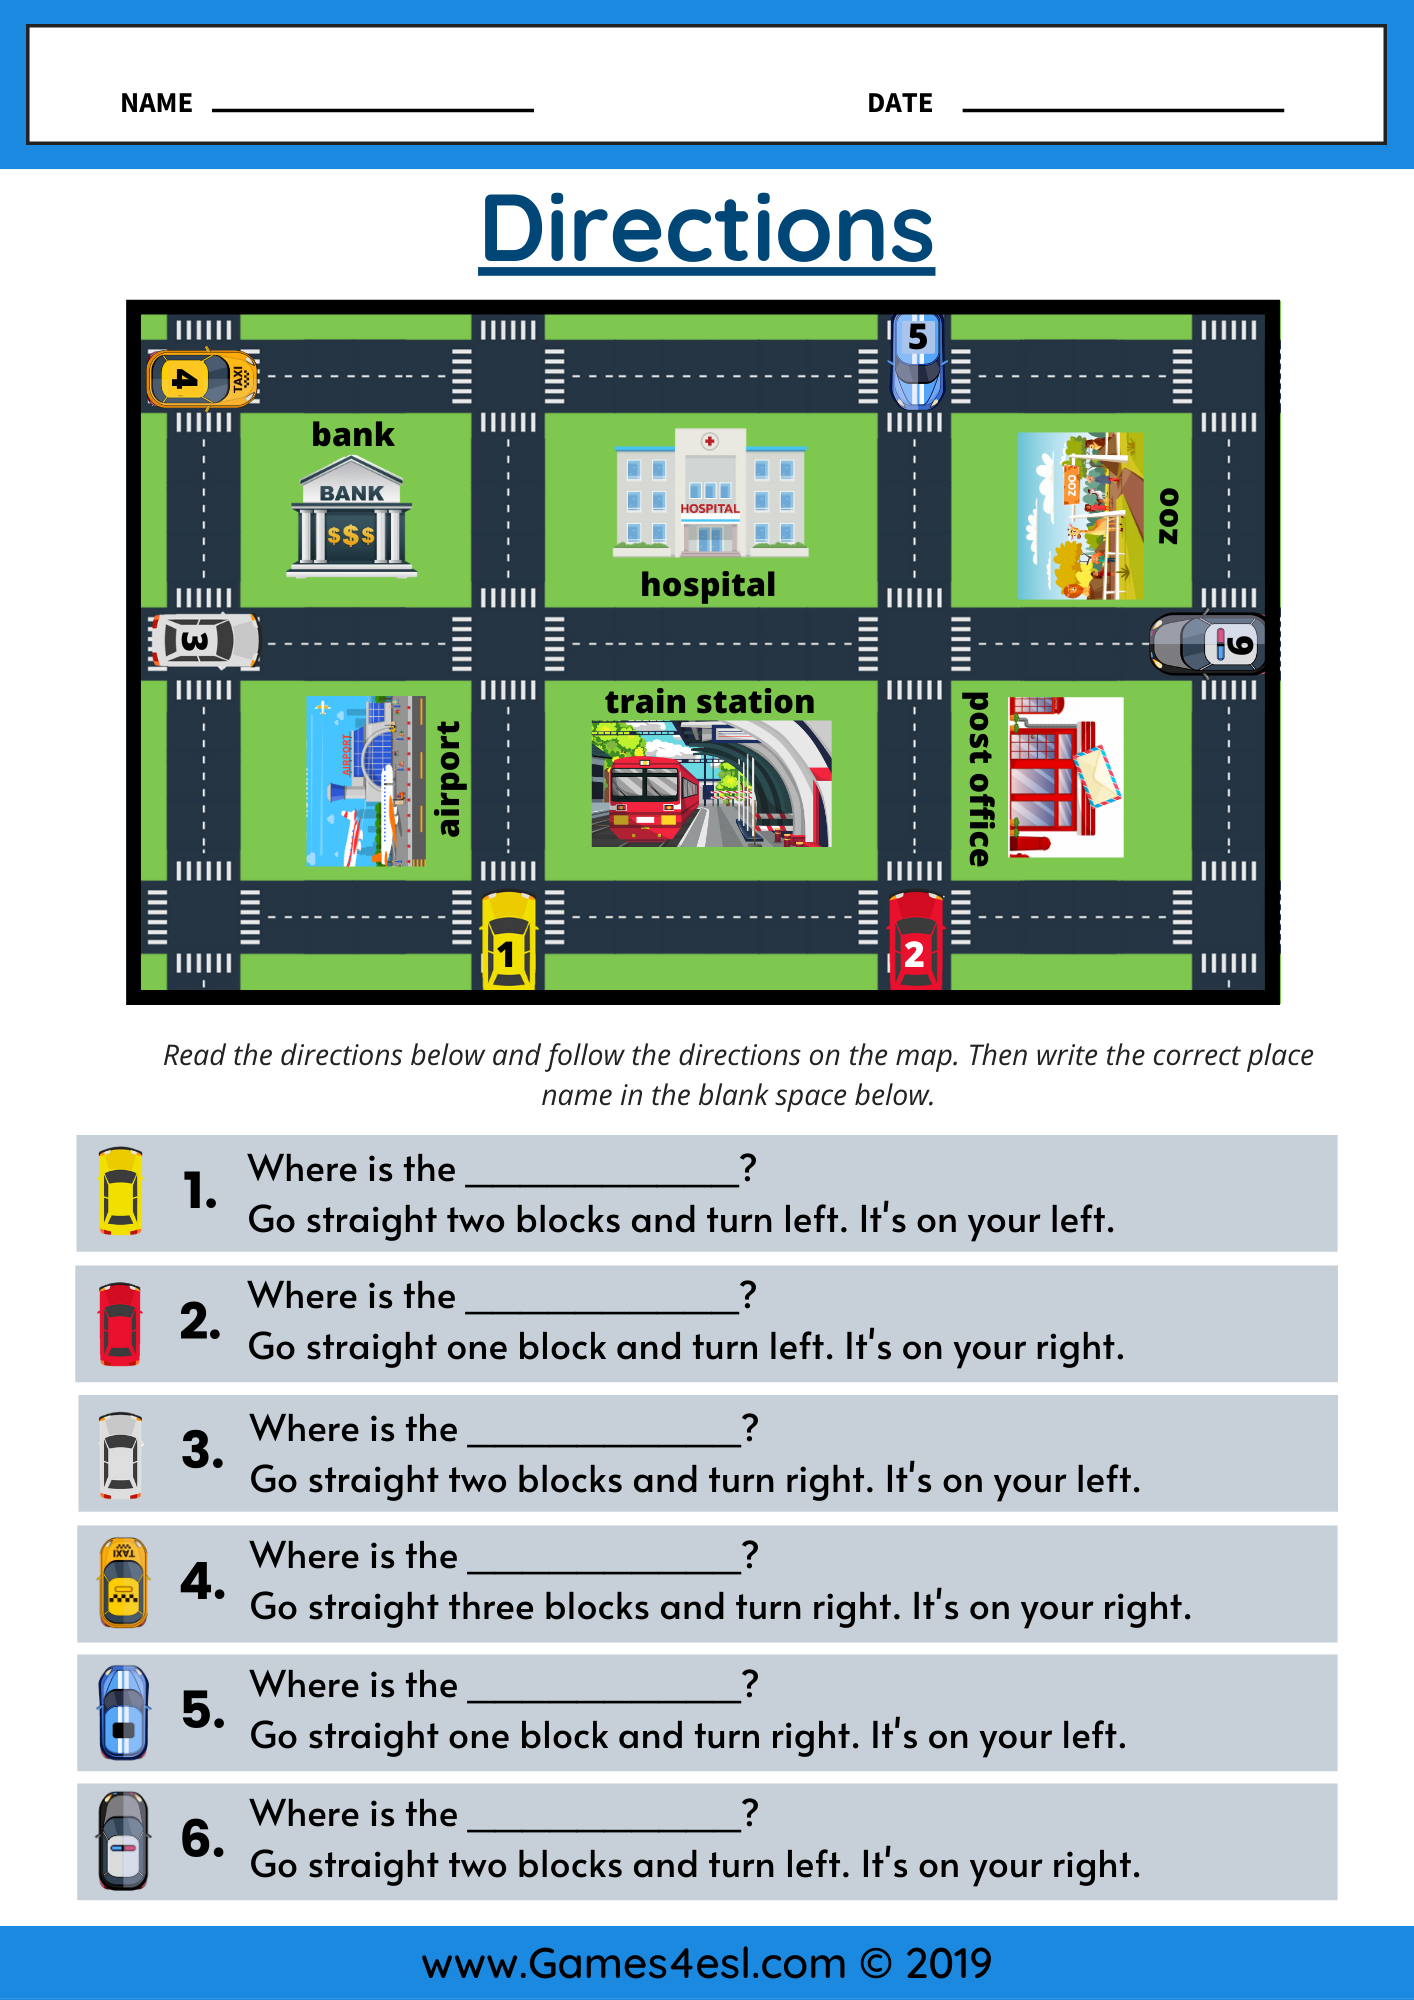 prepositions-of-location-and-direction-exercises-adverbworksheets